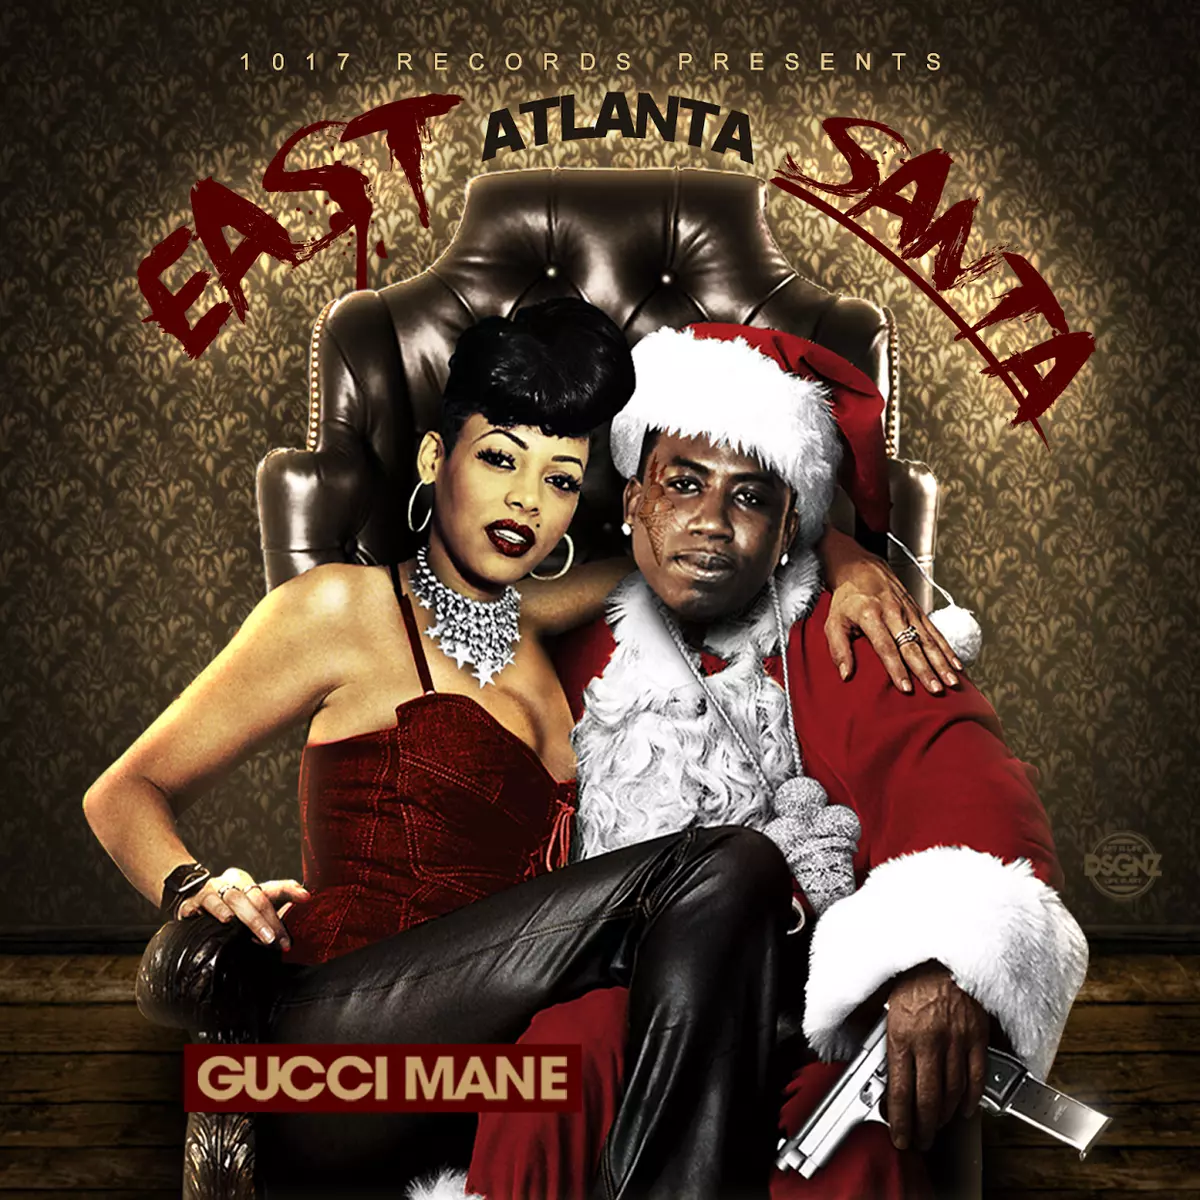 ONE Musicfest - Gucci Mane is so icy. Merry Christmas from East Atlanta.